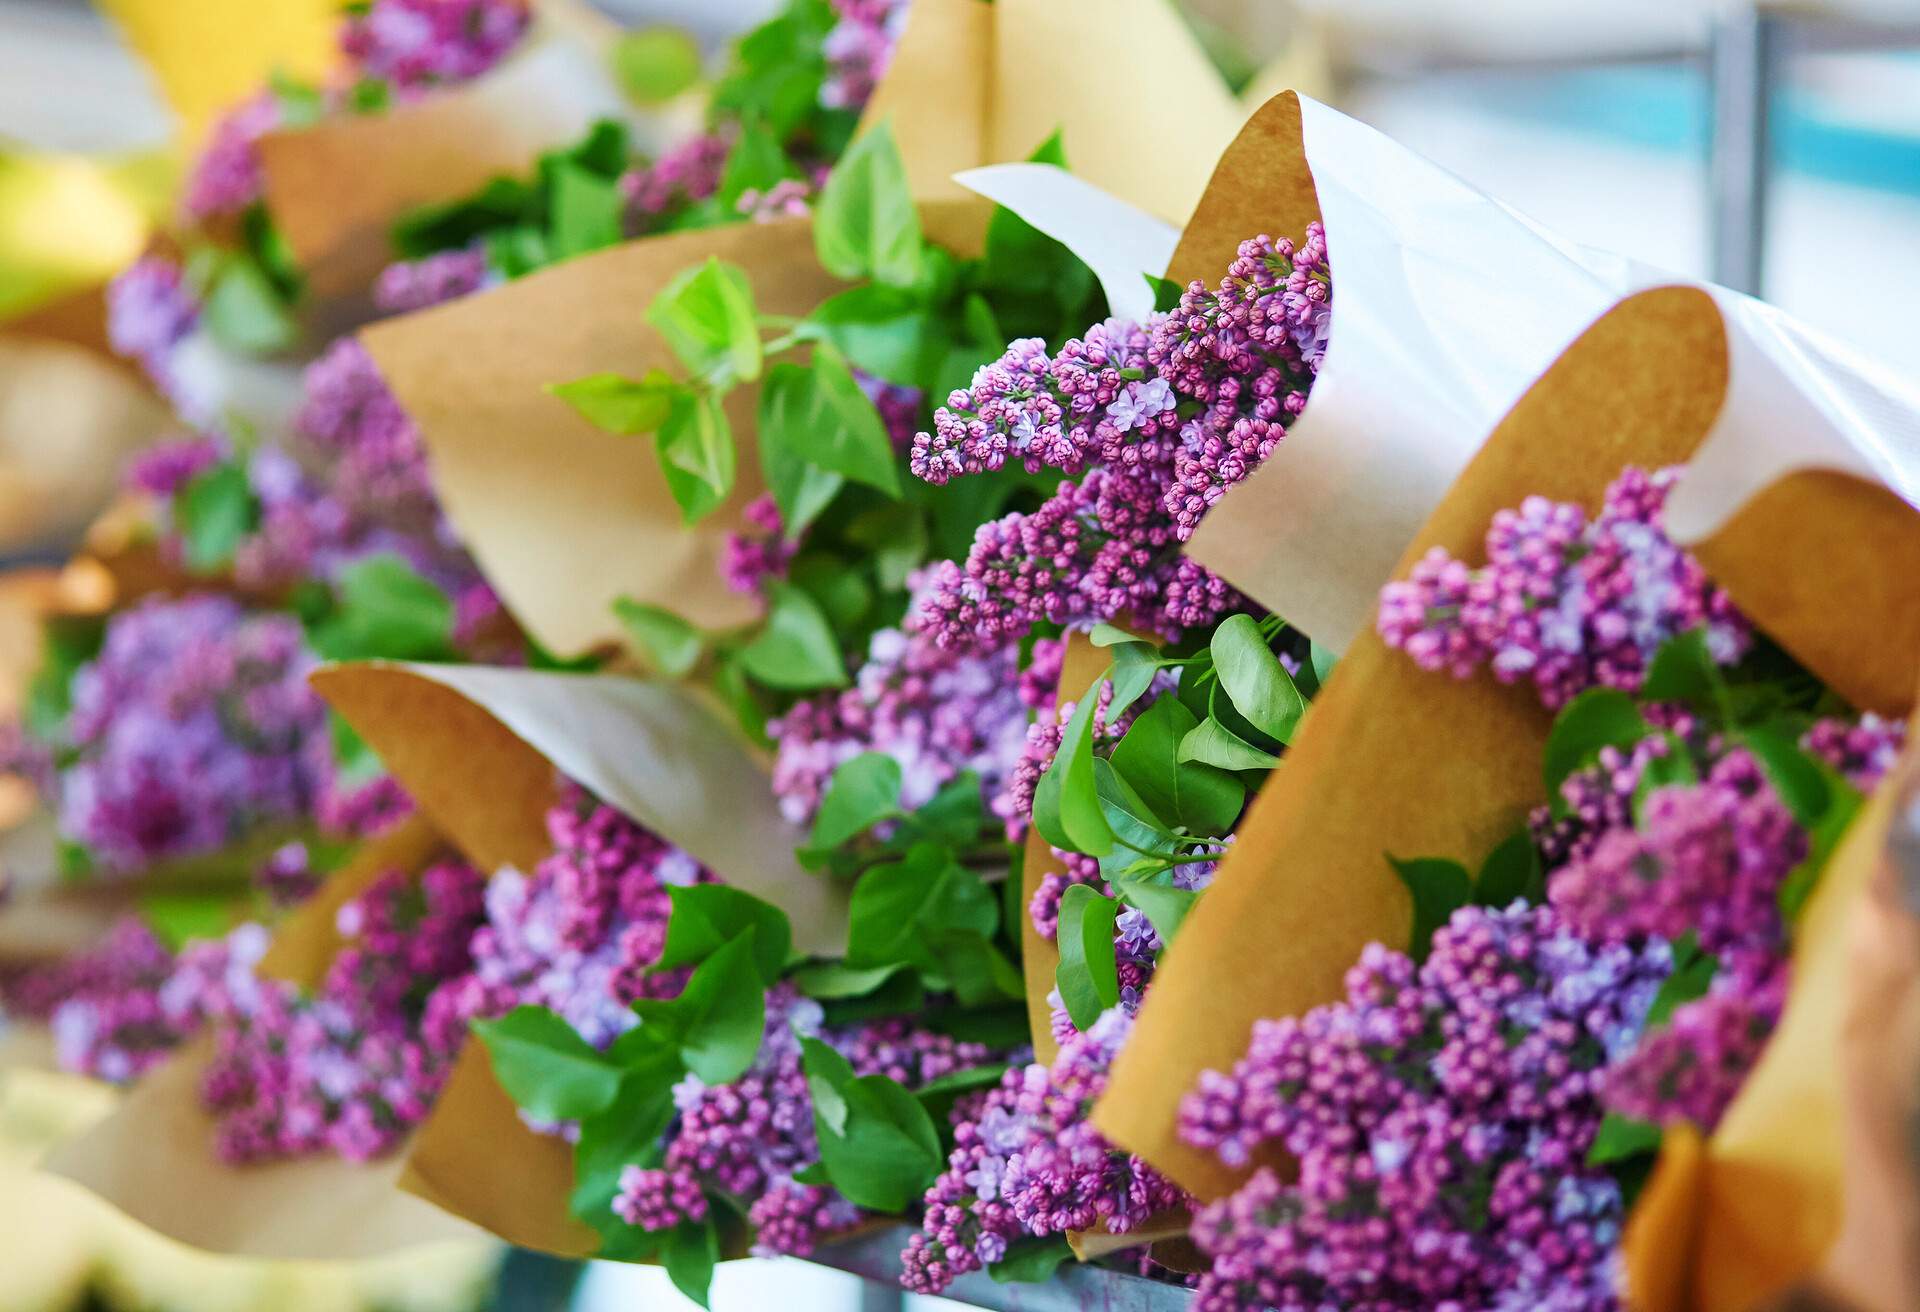 Bunches of fresh lilac on flower market in Paris, France